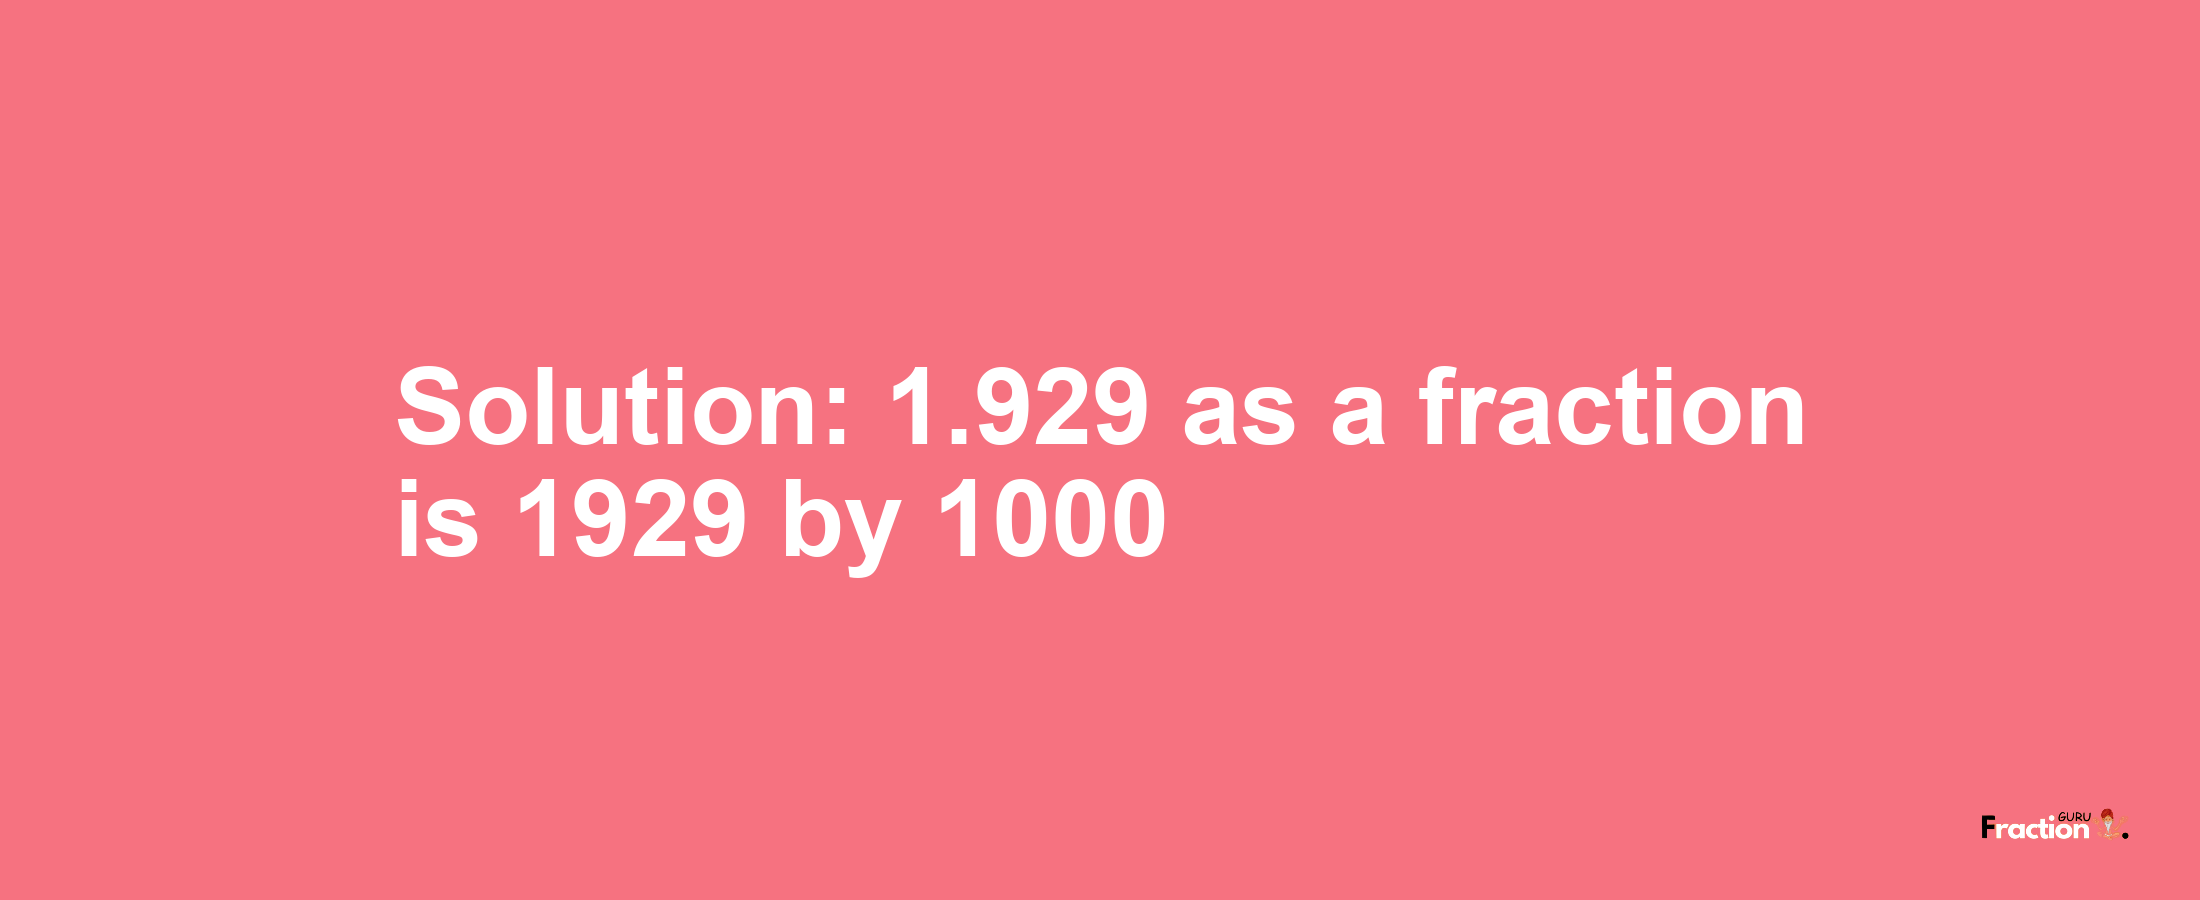 Solution:1.929 as a fraction is 1929/1000